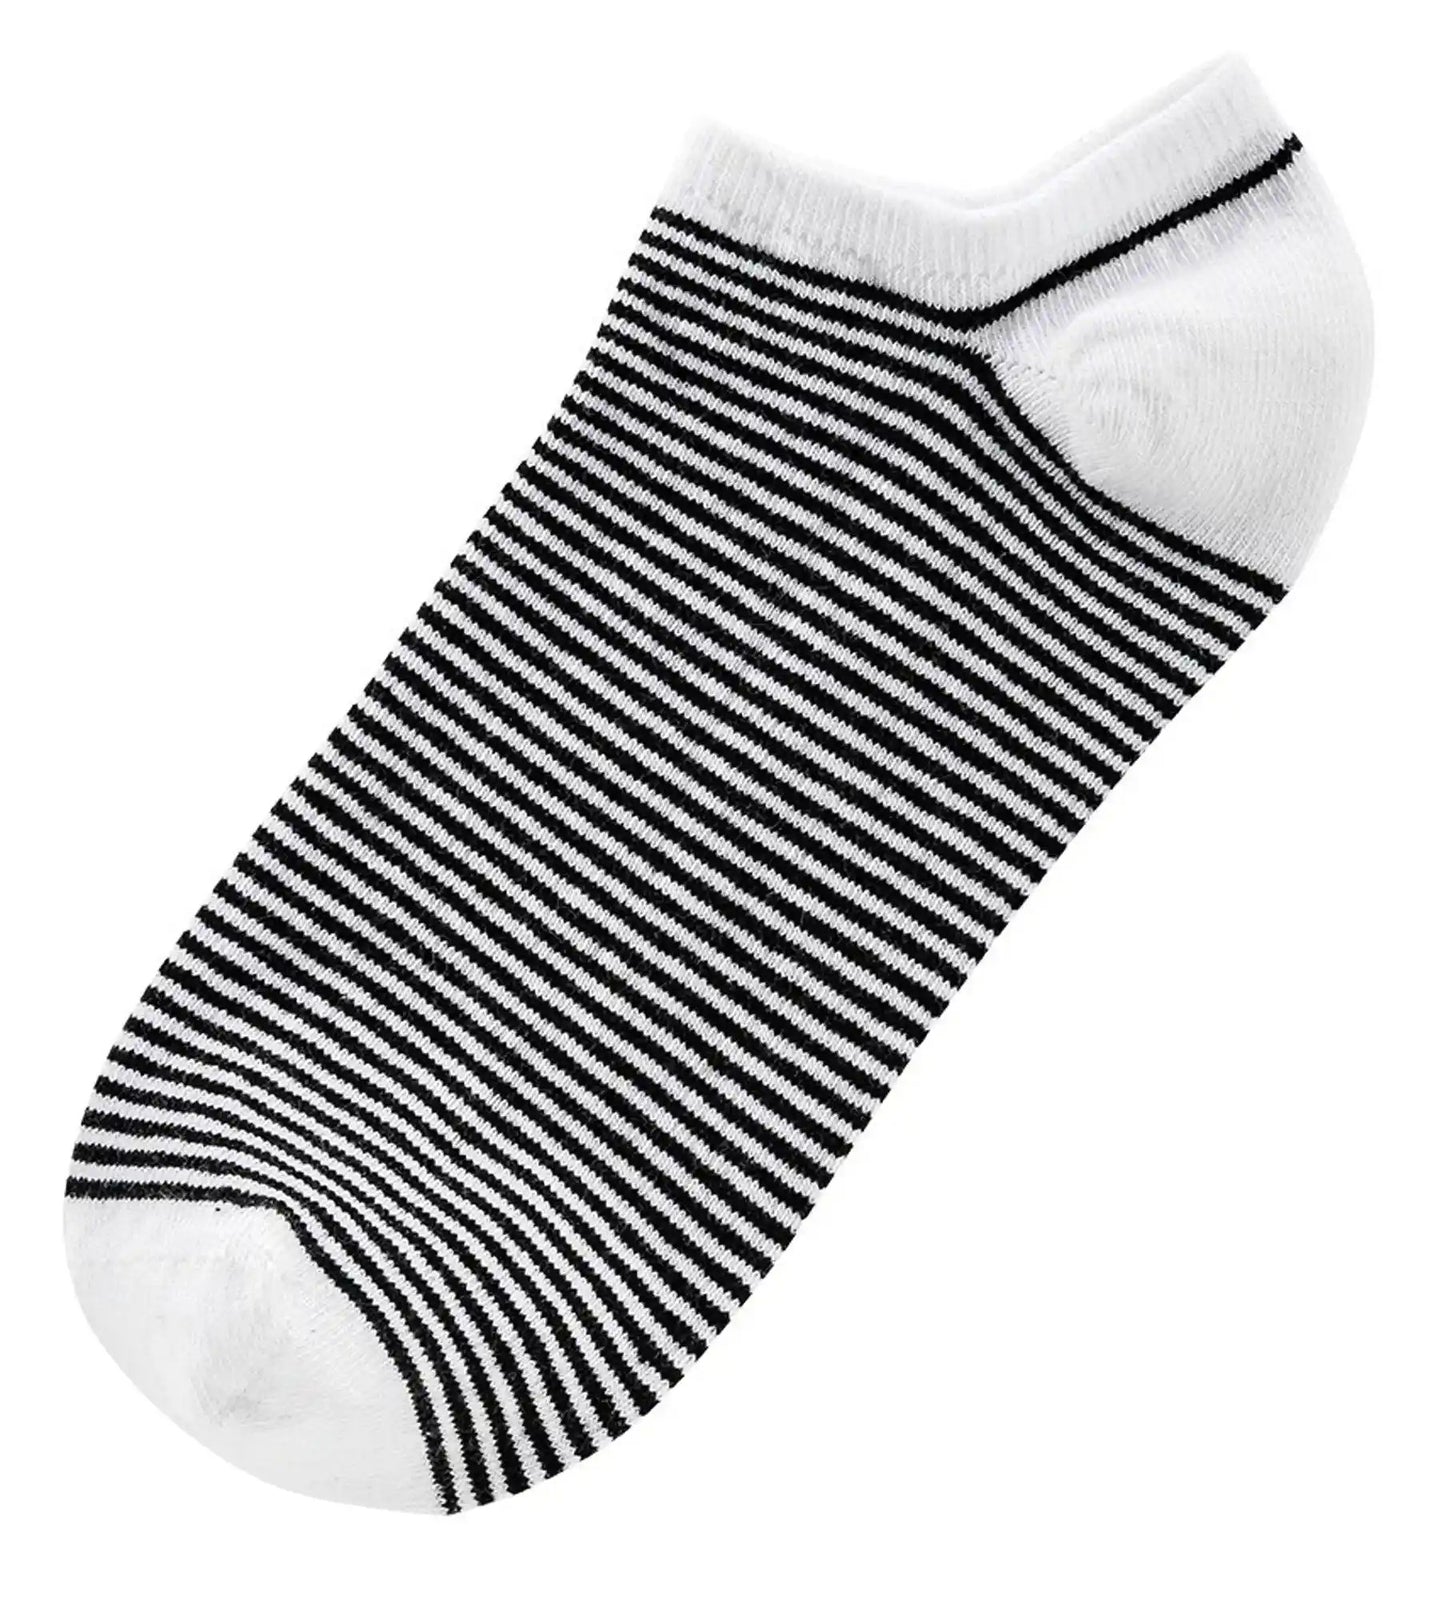 3 pairs of sneaker socks black&amp;white combed cotton black and white pattern